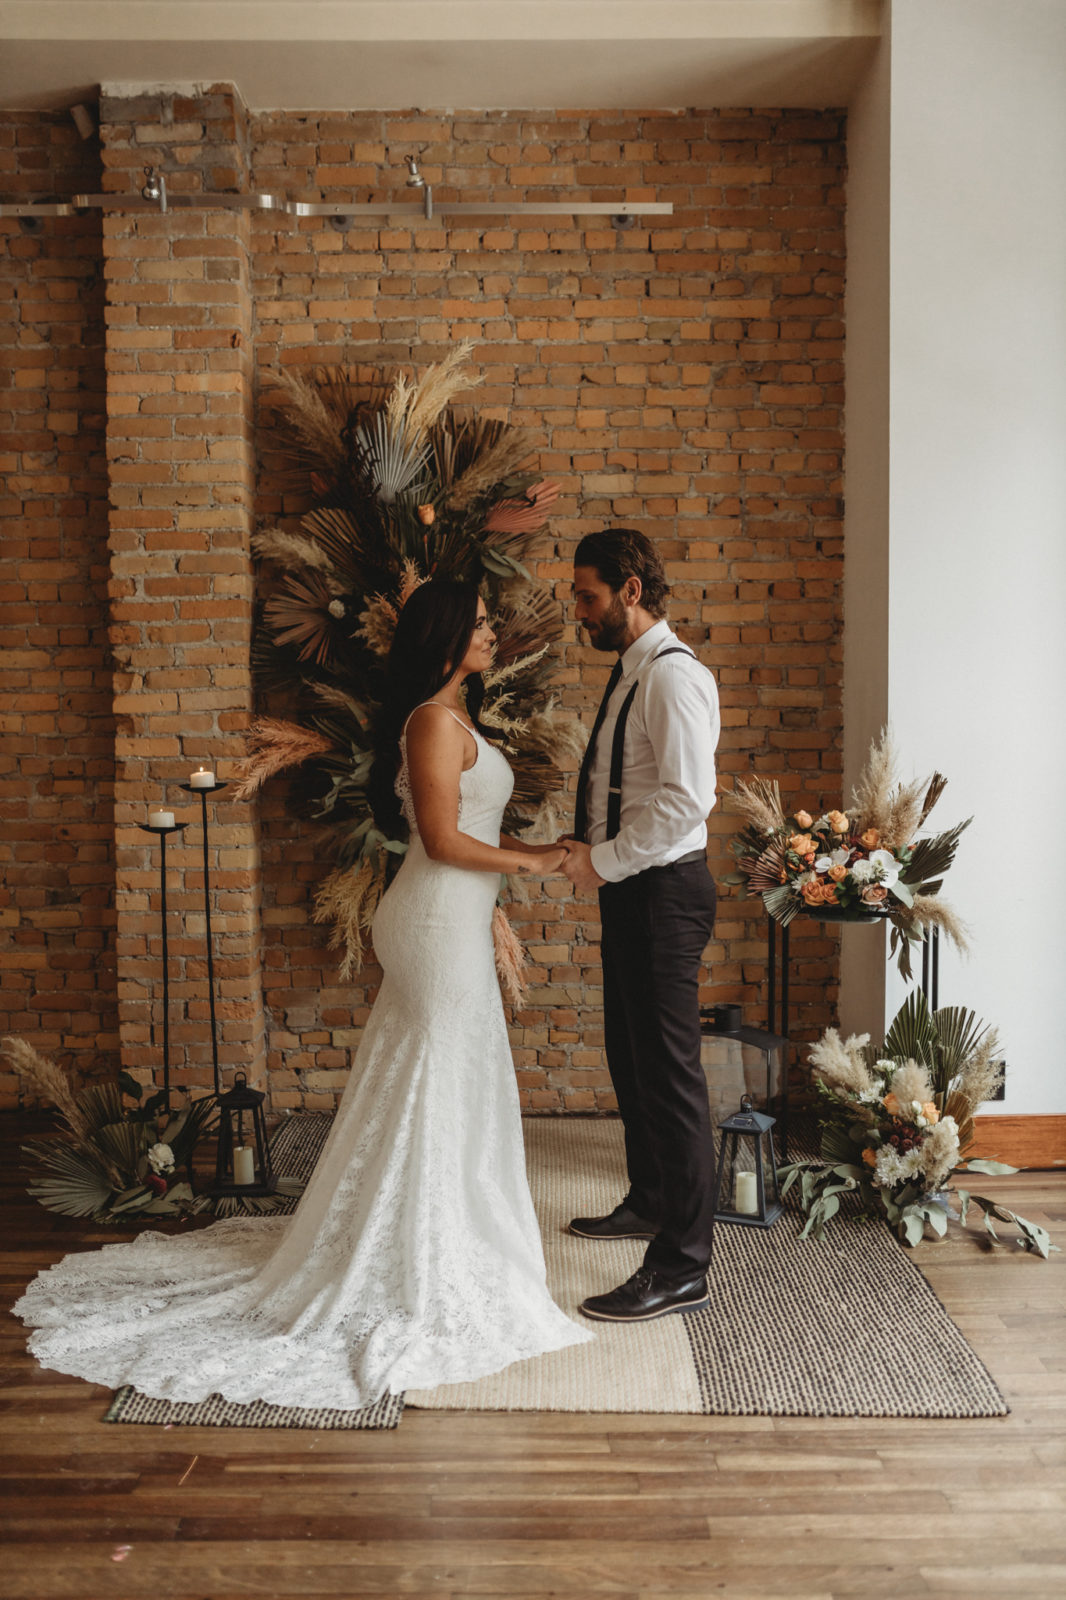 Modern bride and groom holding hands in front of a dried floral installation as wedding ceremony decor inspiration at The Garret